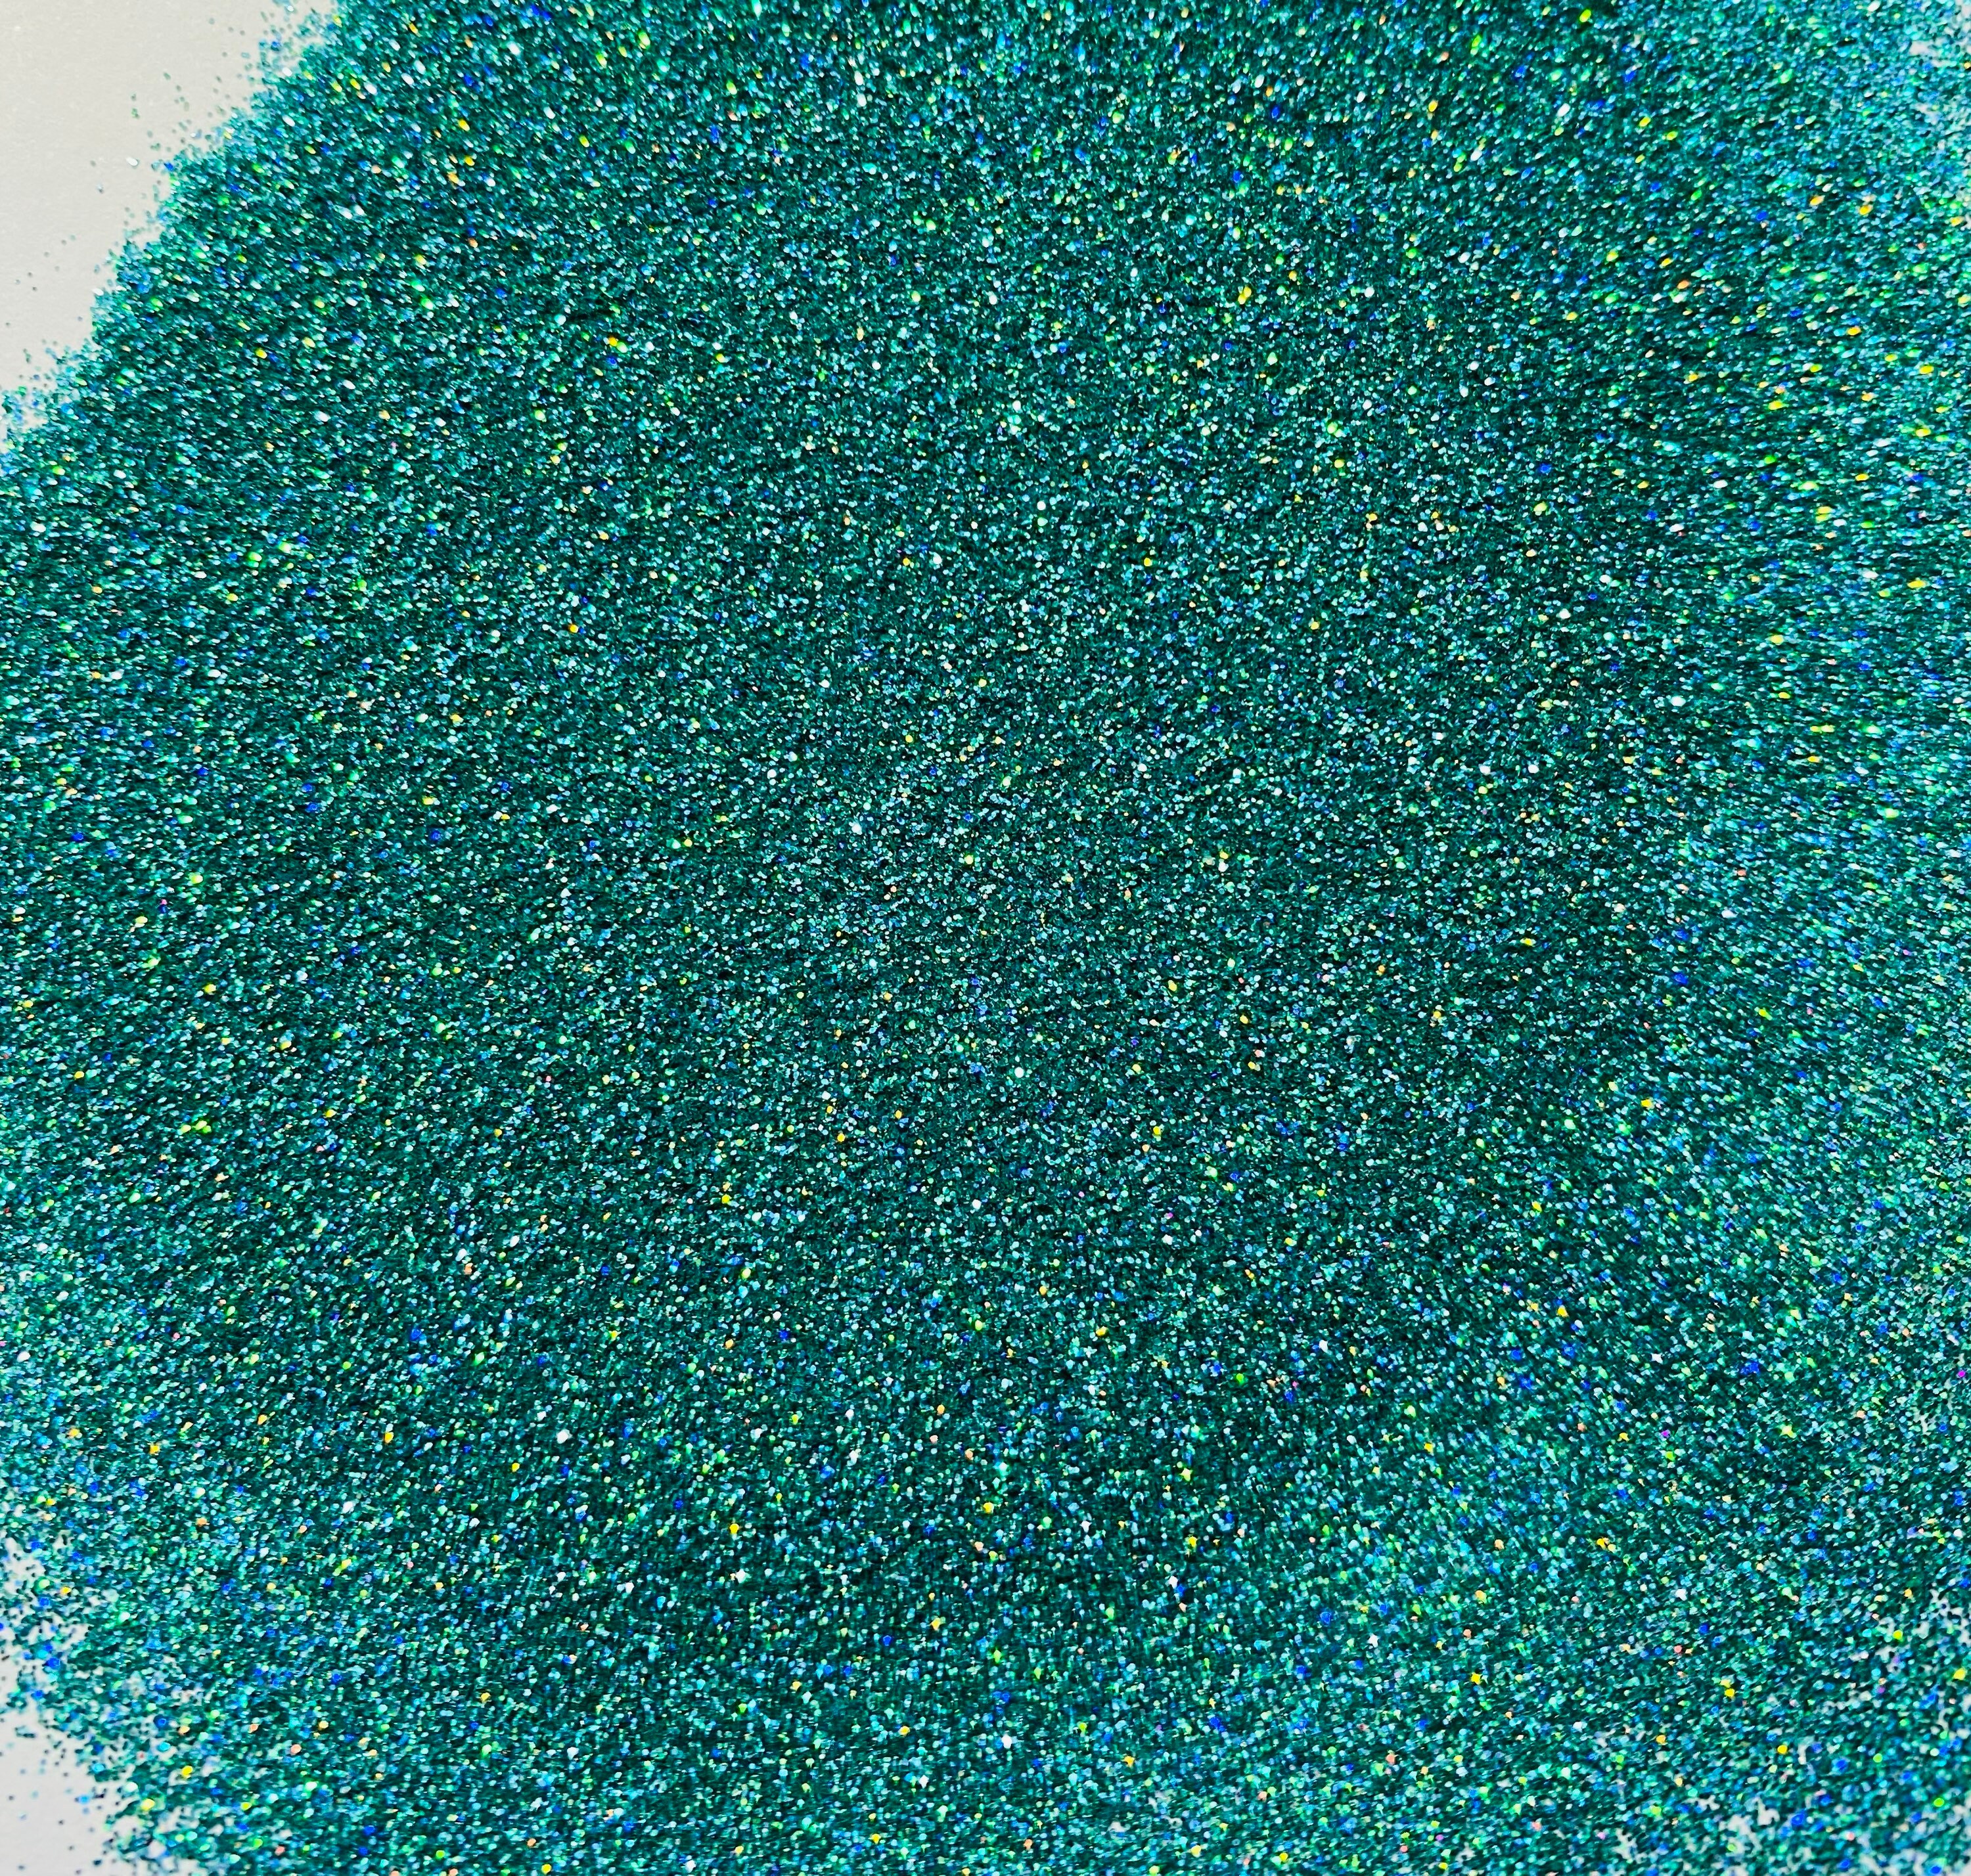 Desert Oasis Chunky Glitter Mix Holographic Teal Gold Silver